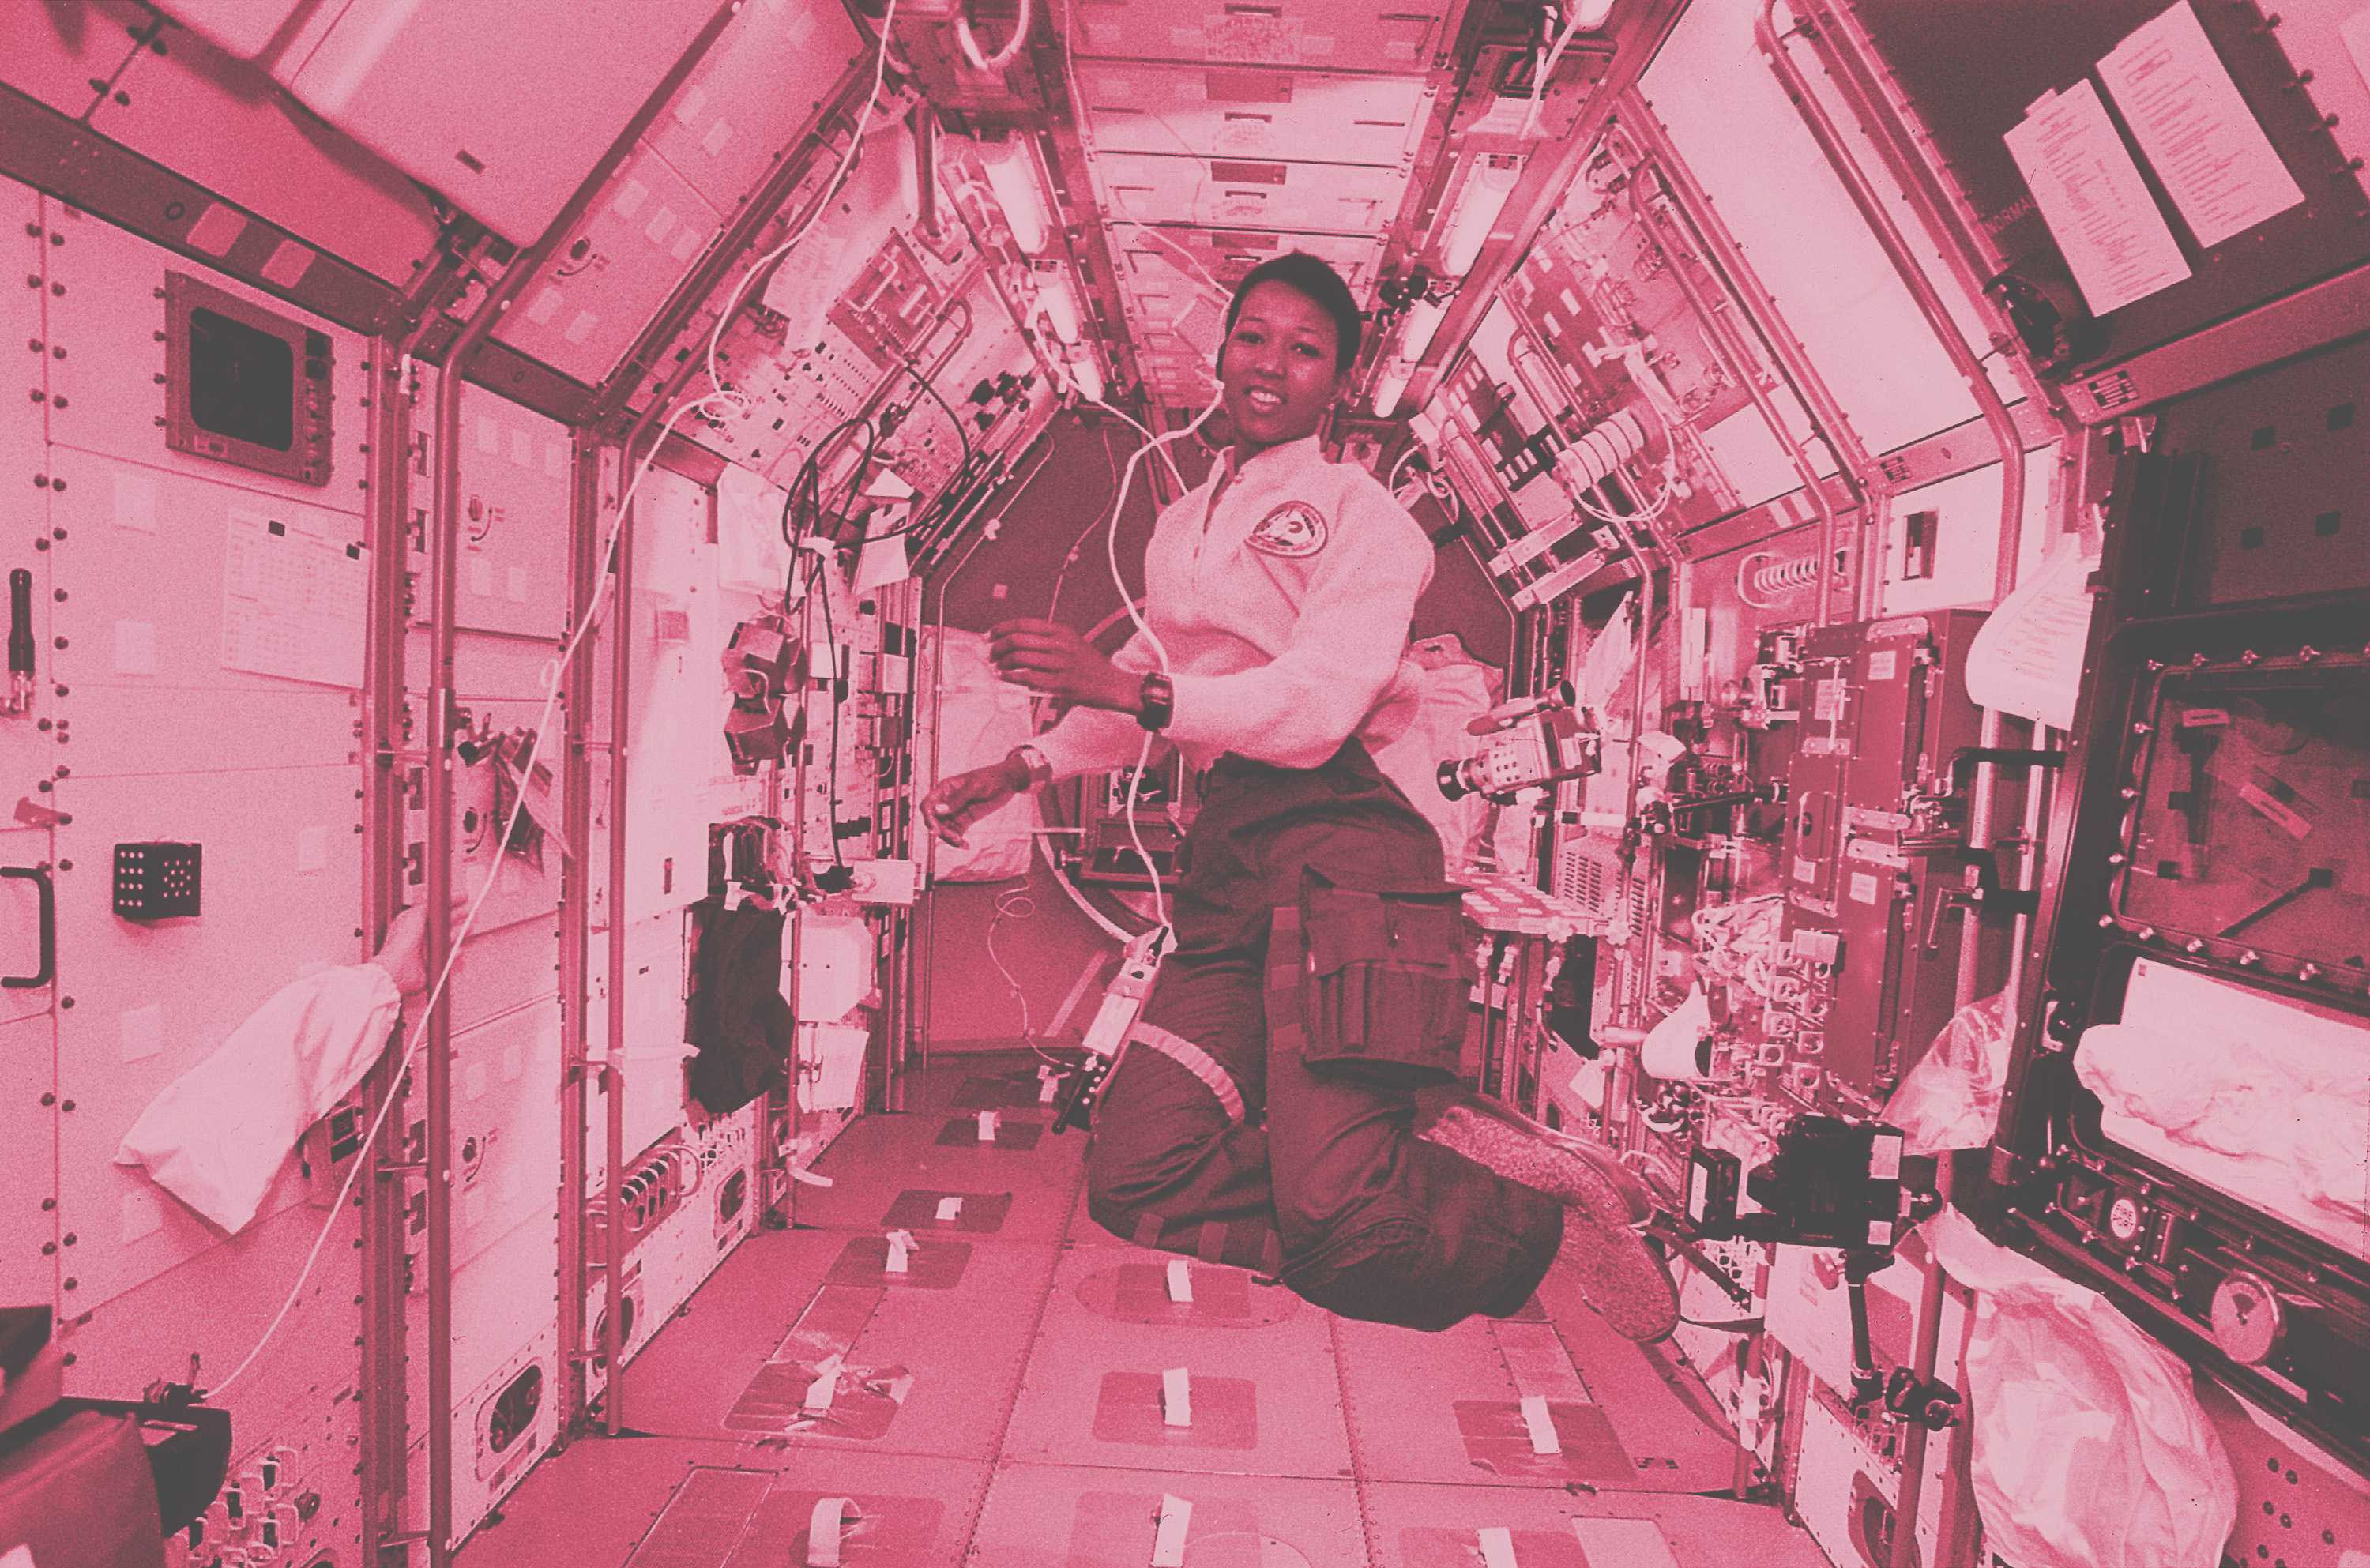 Astronaut Mae Jemison is onboard and floating inside a space craft. The image has a pink overlay.